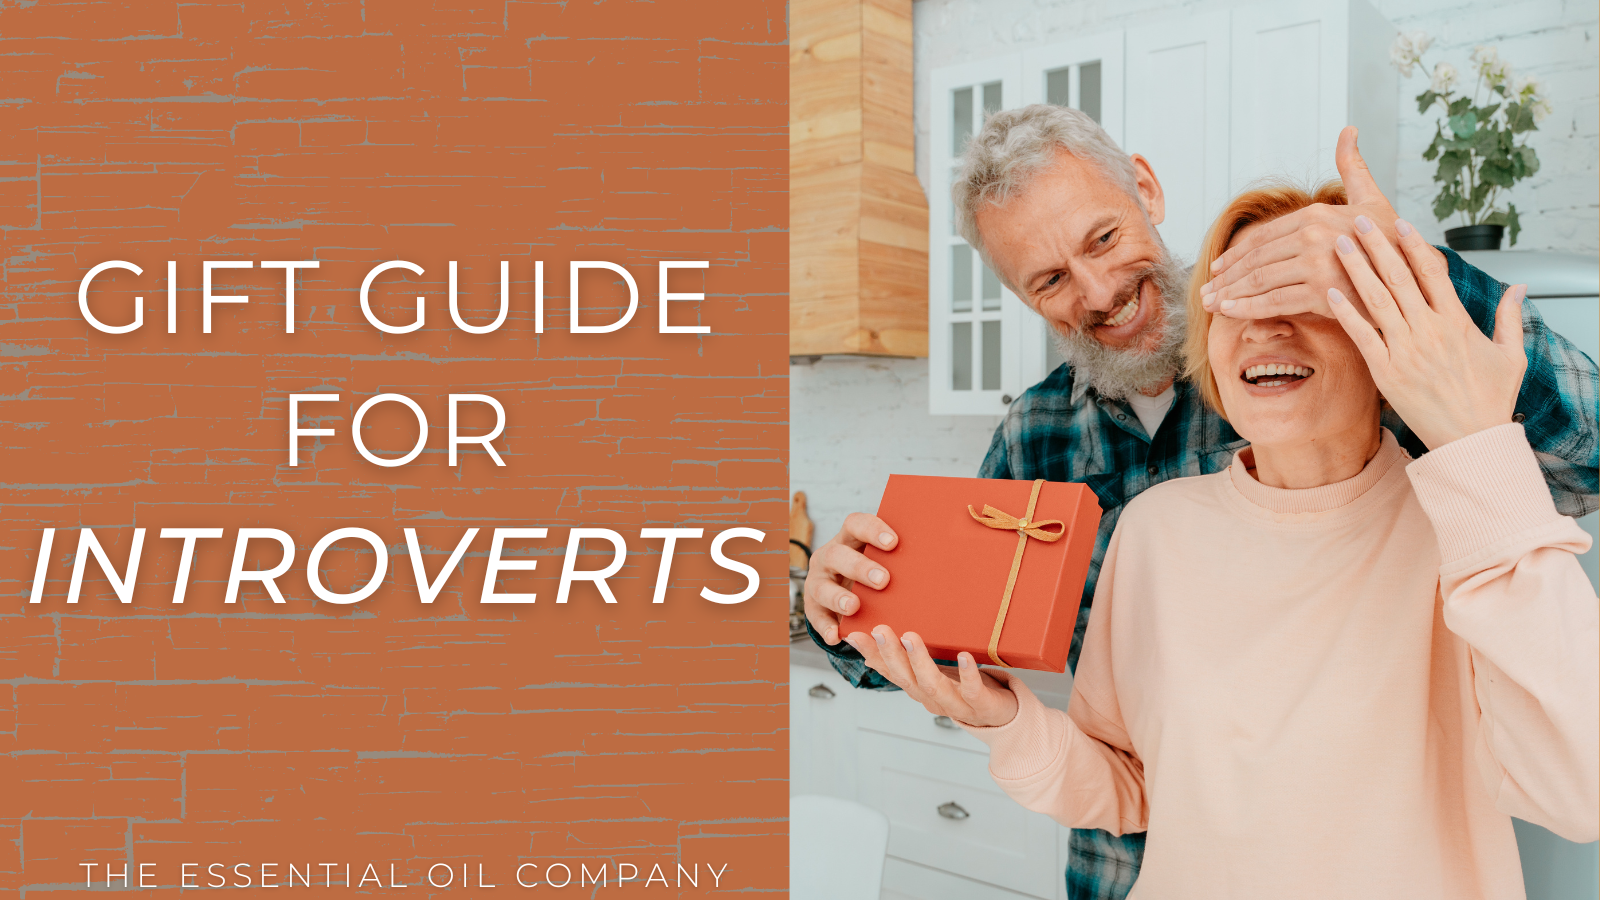 Gift Guide for Introverts